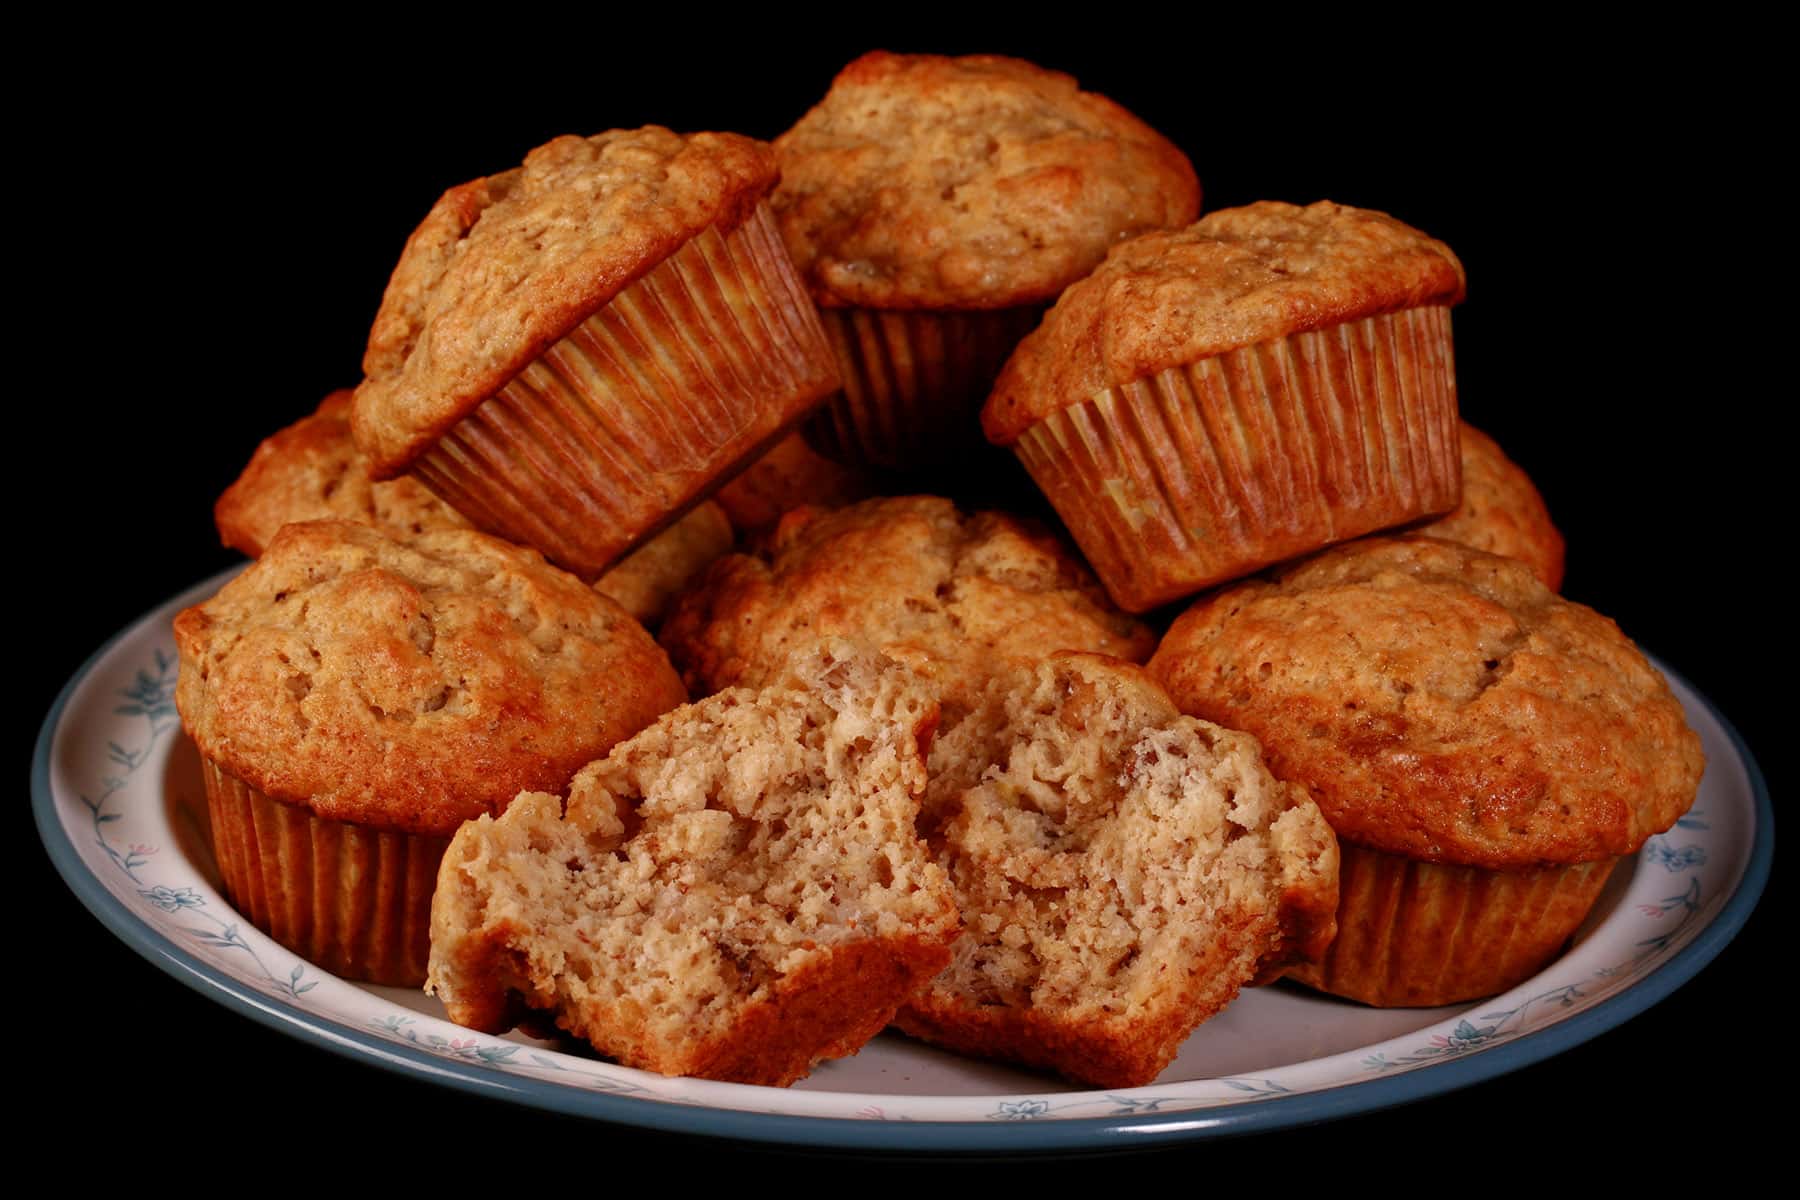 A plate of banana walnut muffins with one broken in half.